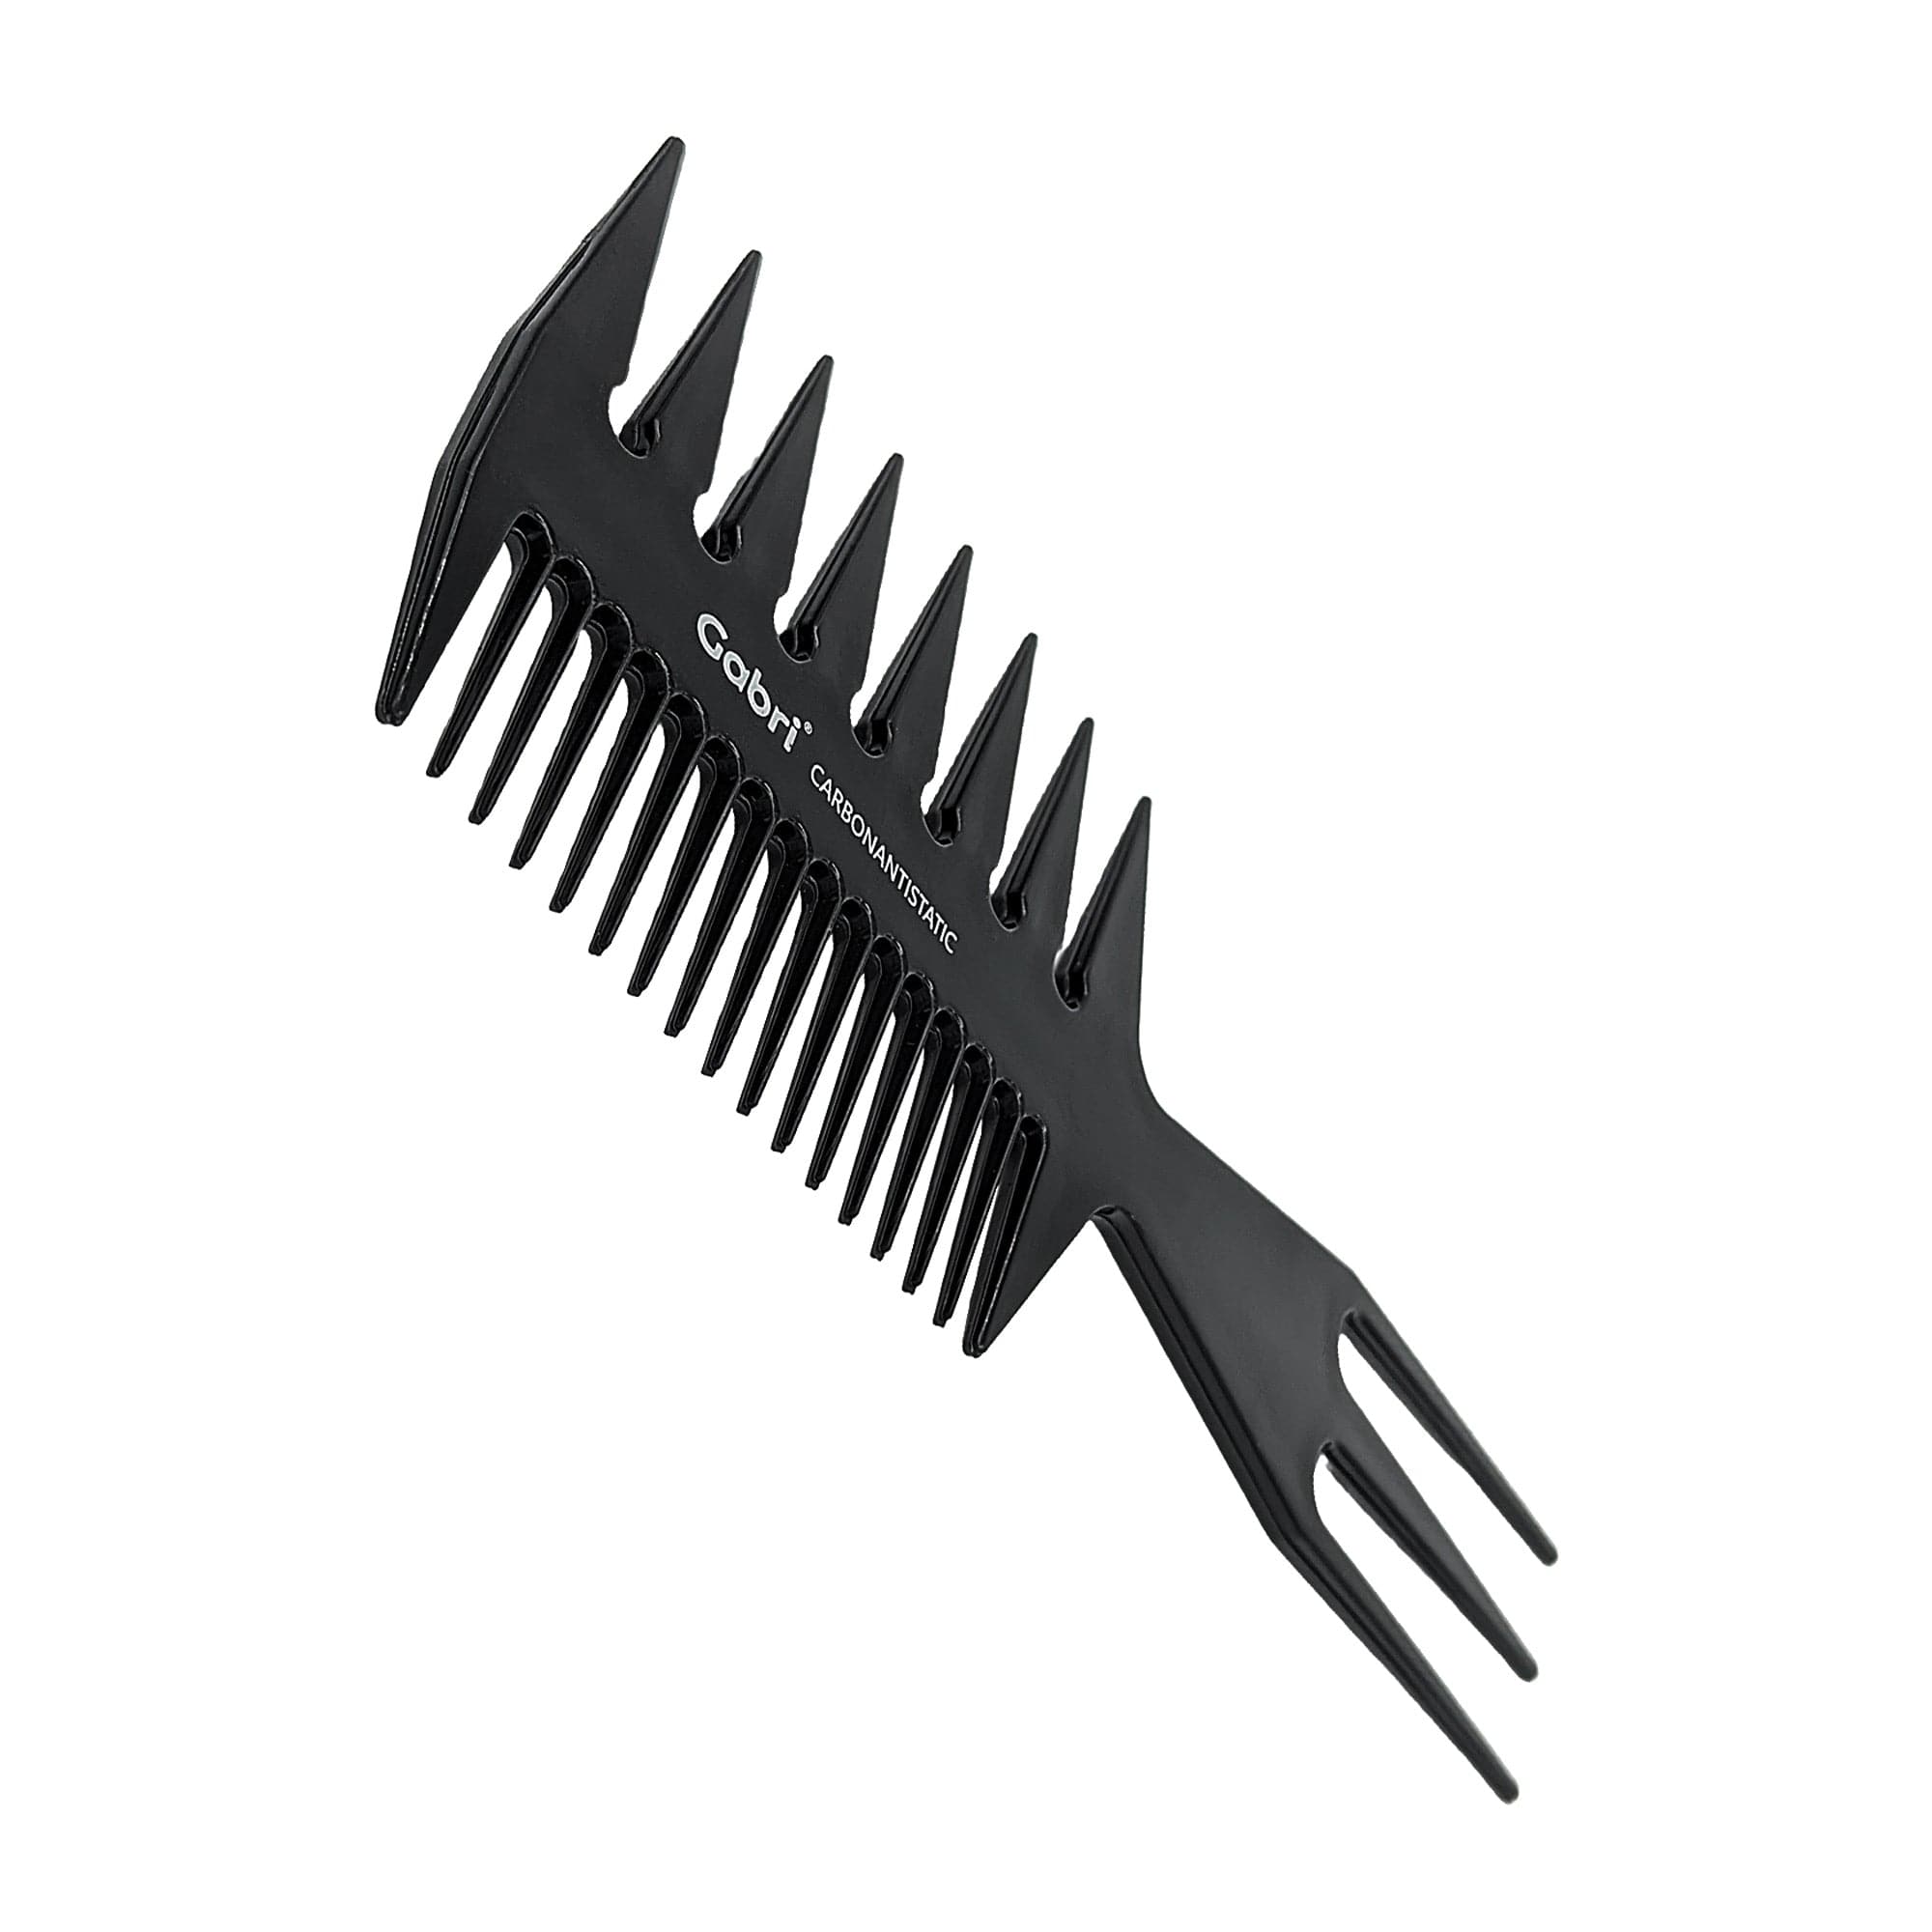 Gabri - Hair Styling Comb 3in1 Detangling Wide Tooth & Pin Lift No.36 21cm